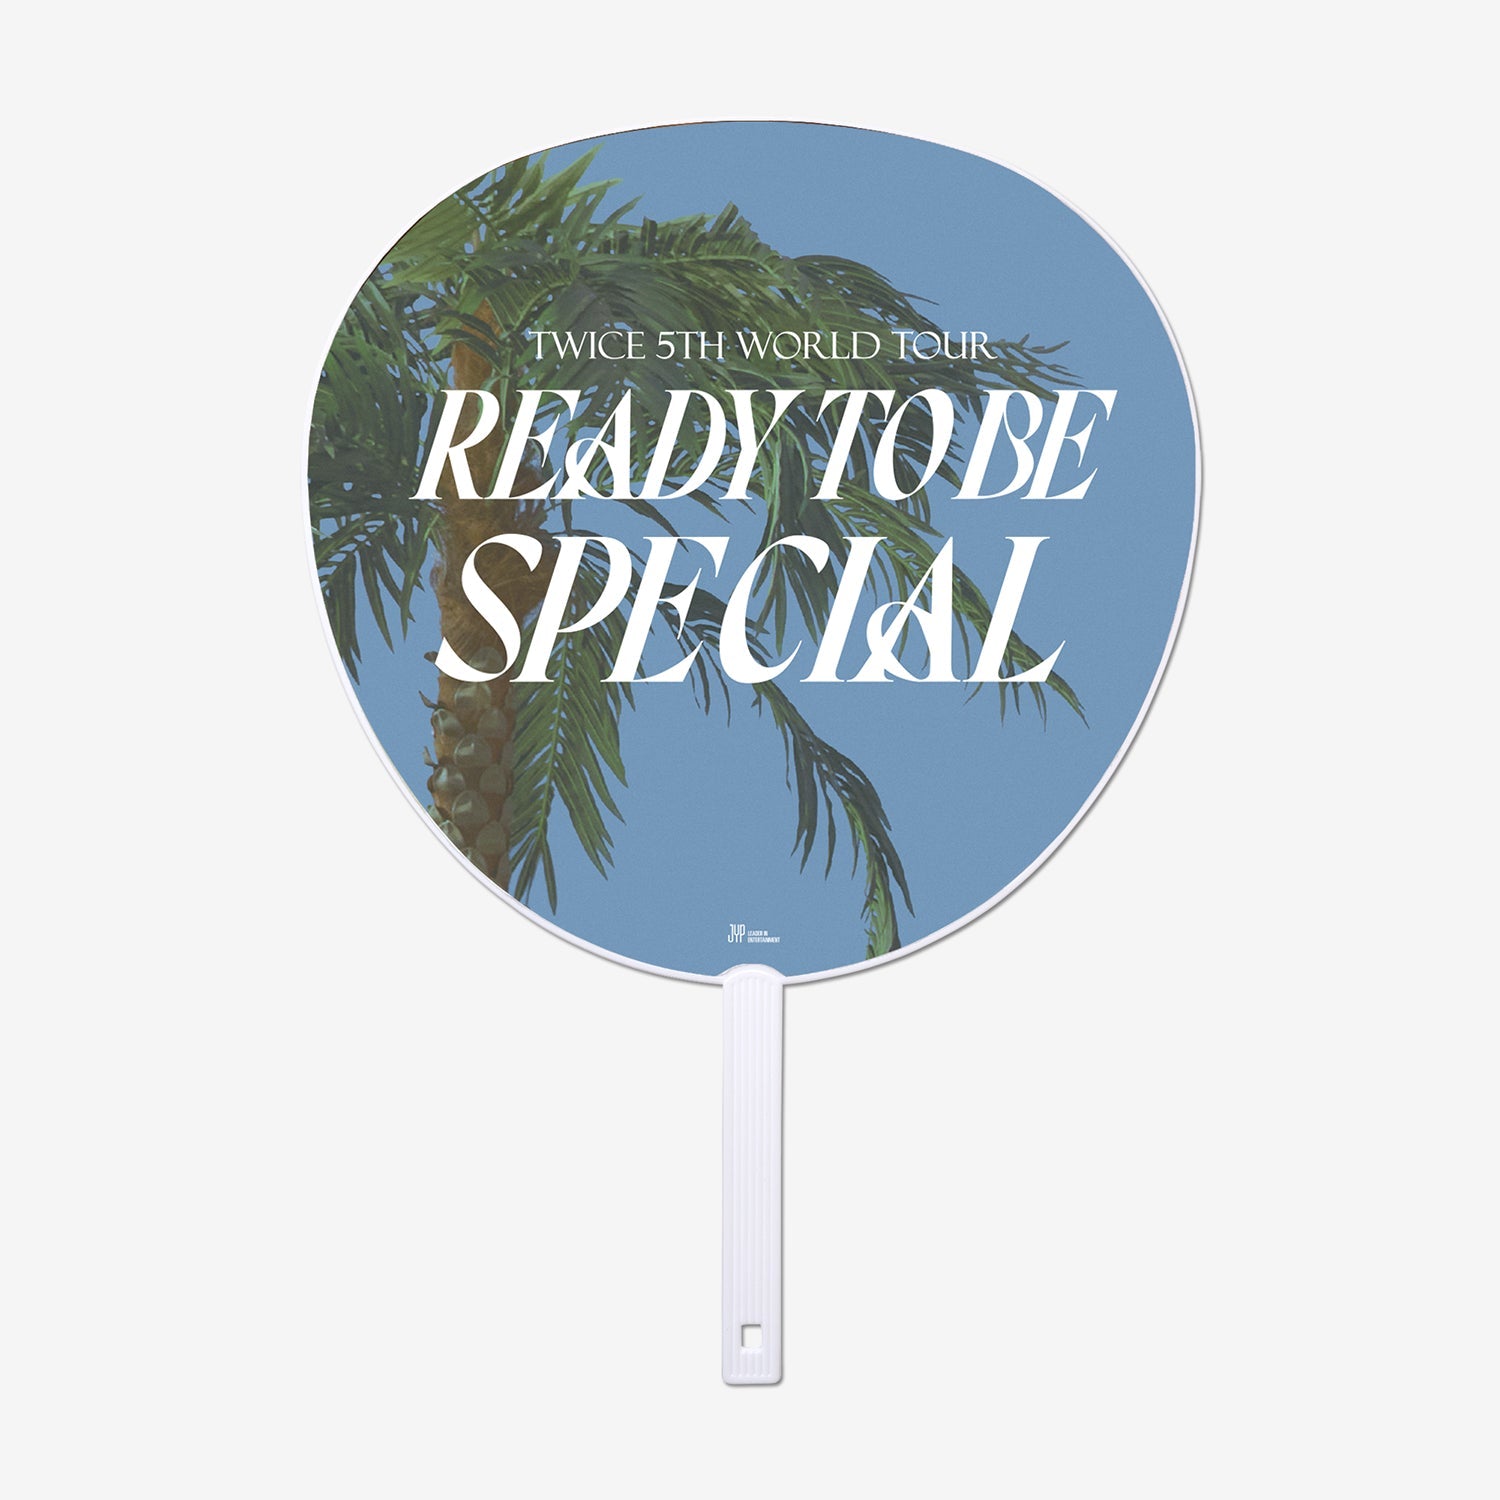 IMAGE PICKET - DAHYUN【SPECIAL】/ TWICE『READY TO BE SPECIAL』